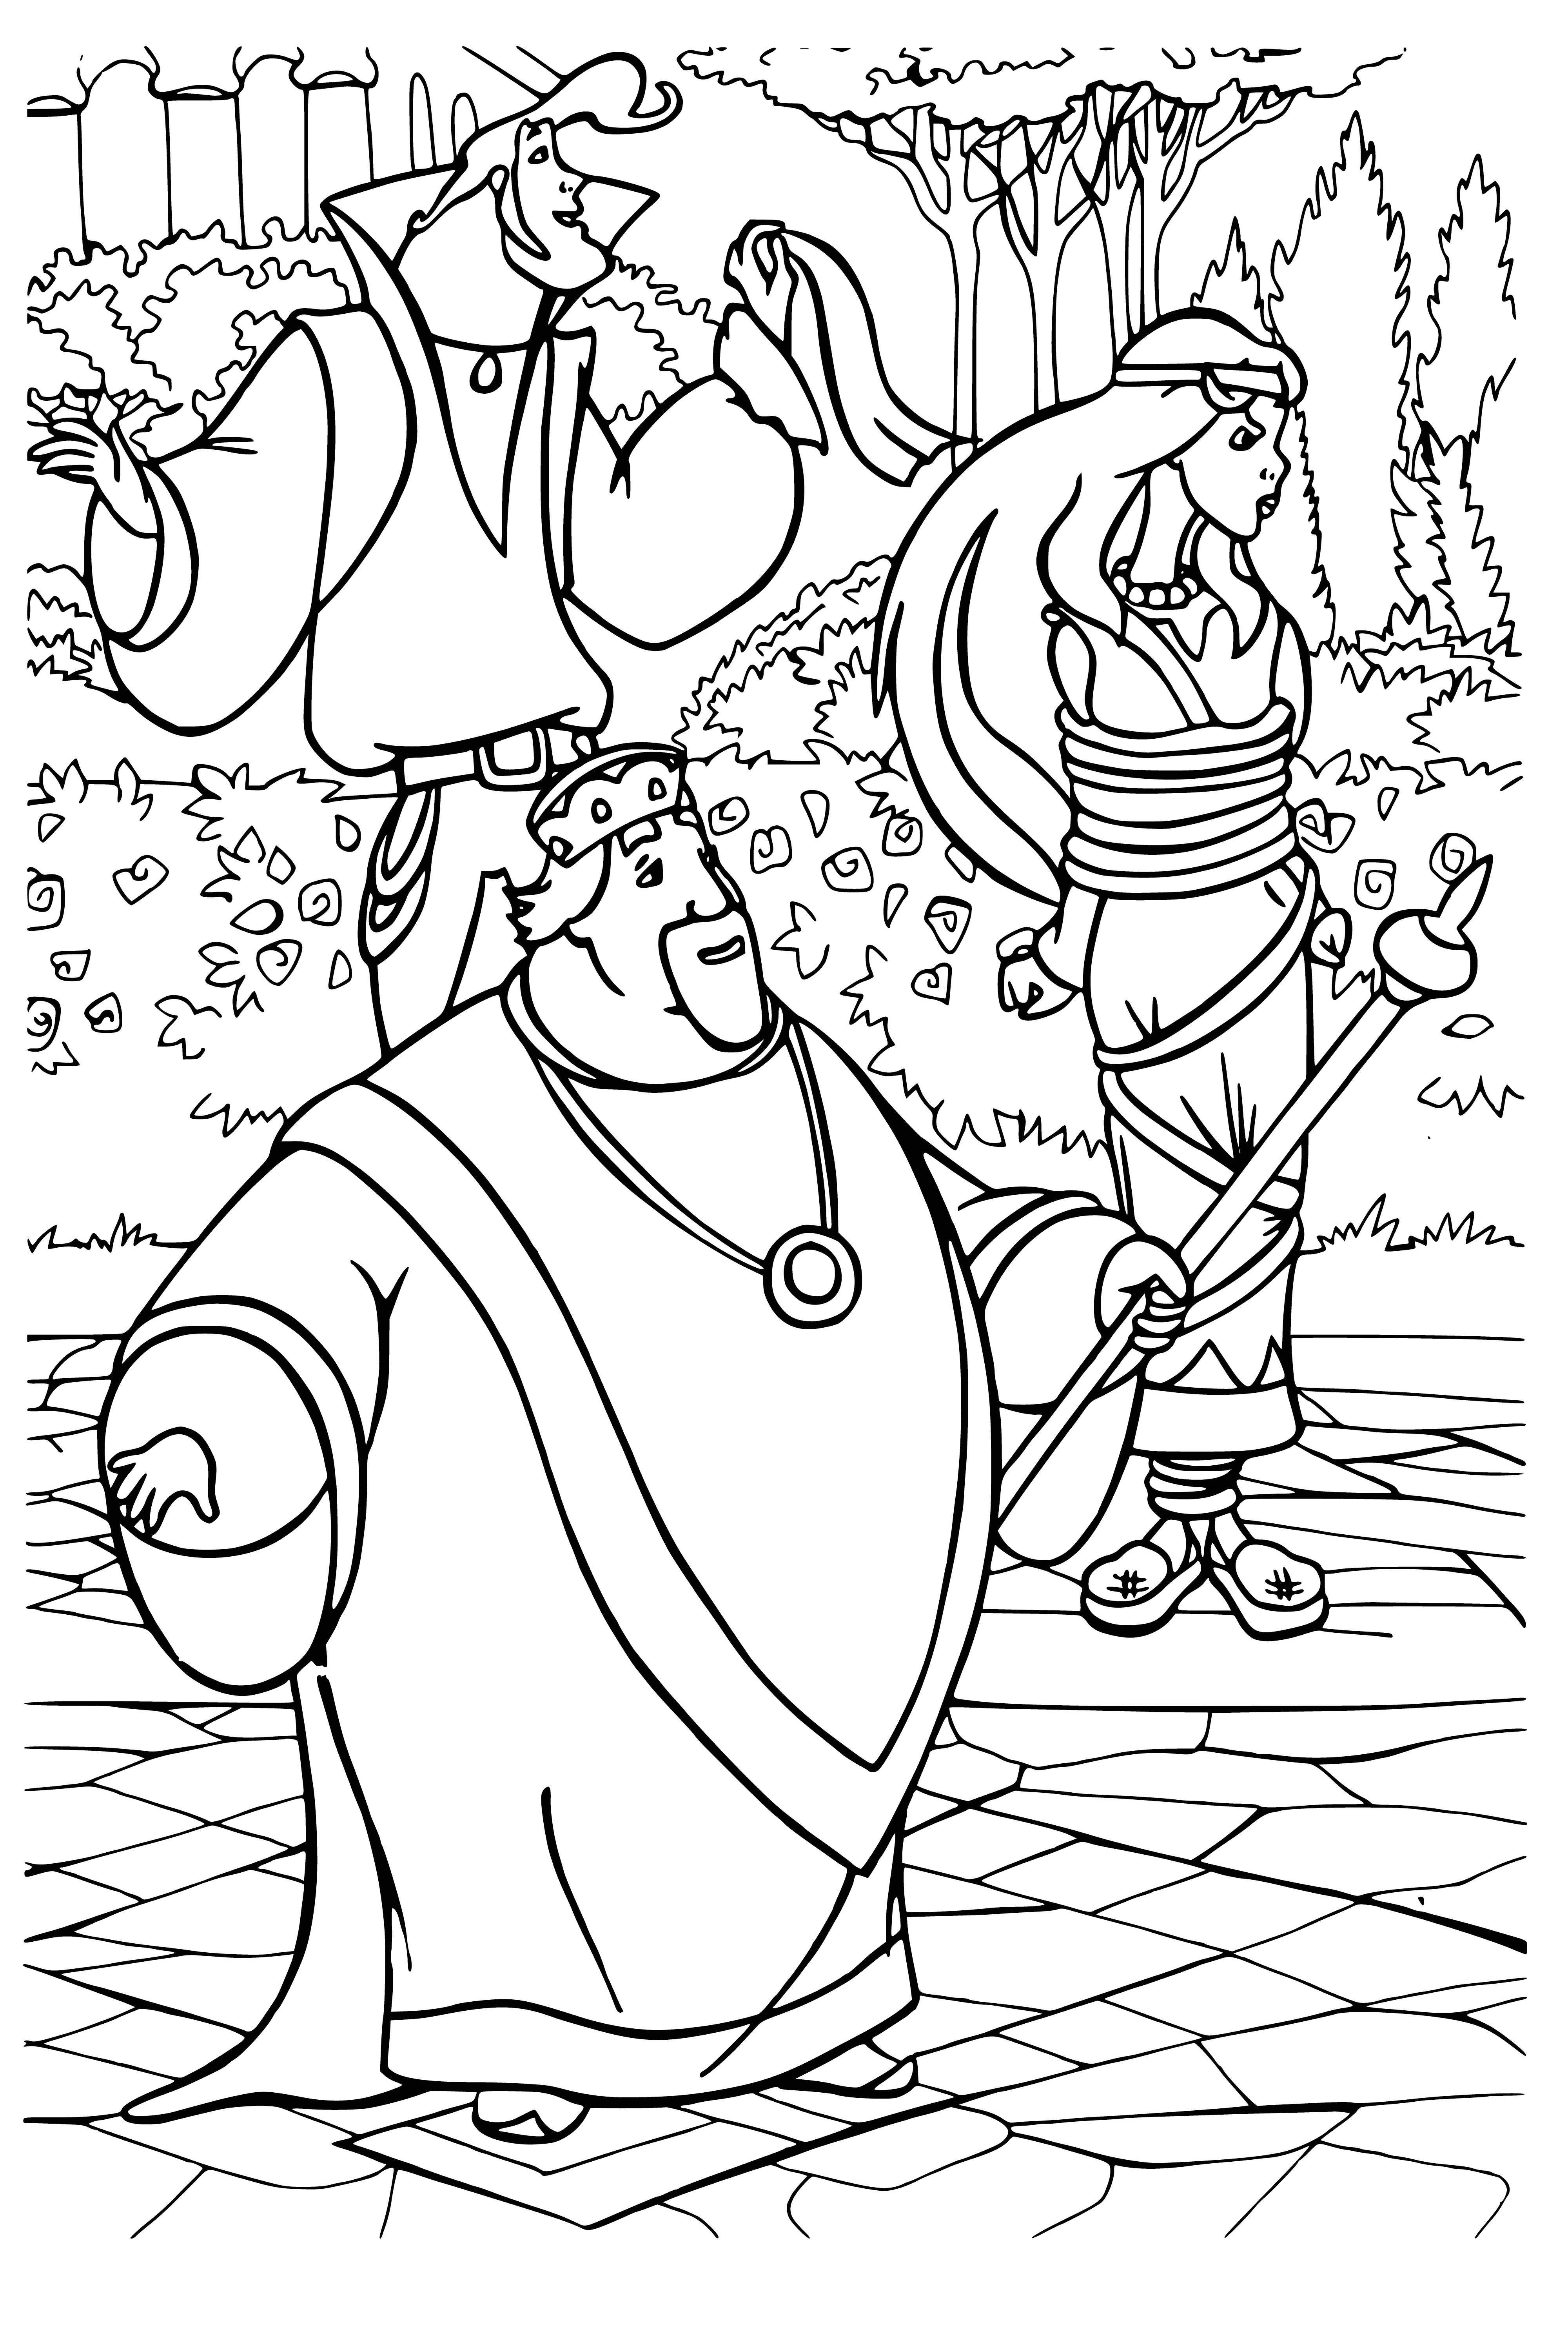 coloring page: Large muscular man on horse flanked by smaller man, girl on donkey. Man has spear, girl tied. All look faced with worry/fear.